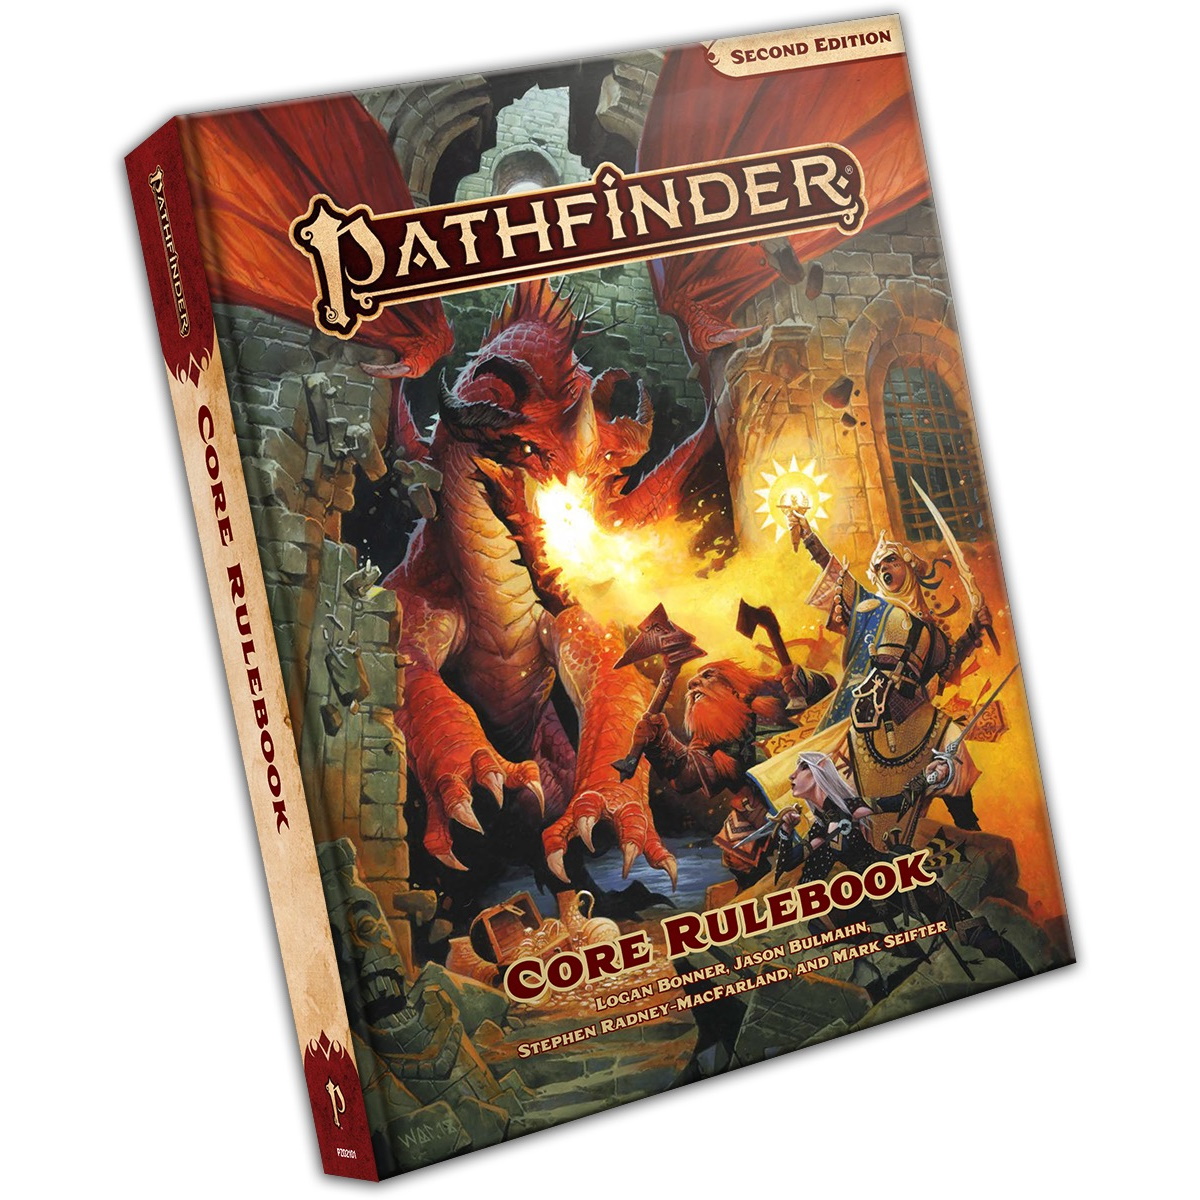 Pathfinder 2nd Edition just came out and its core books are already 30